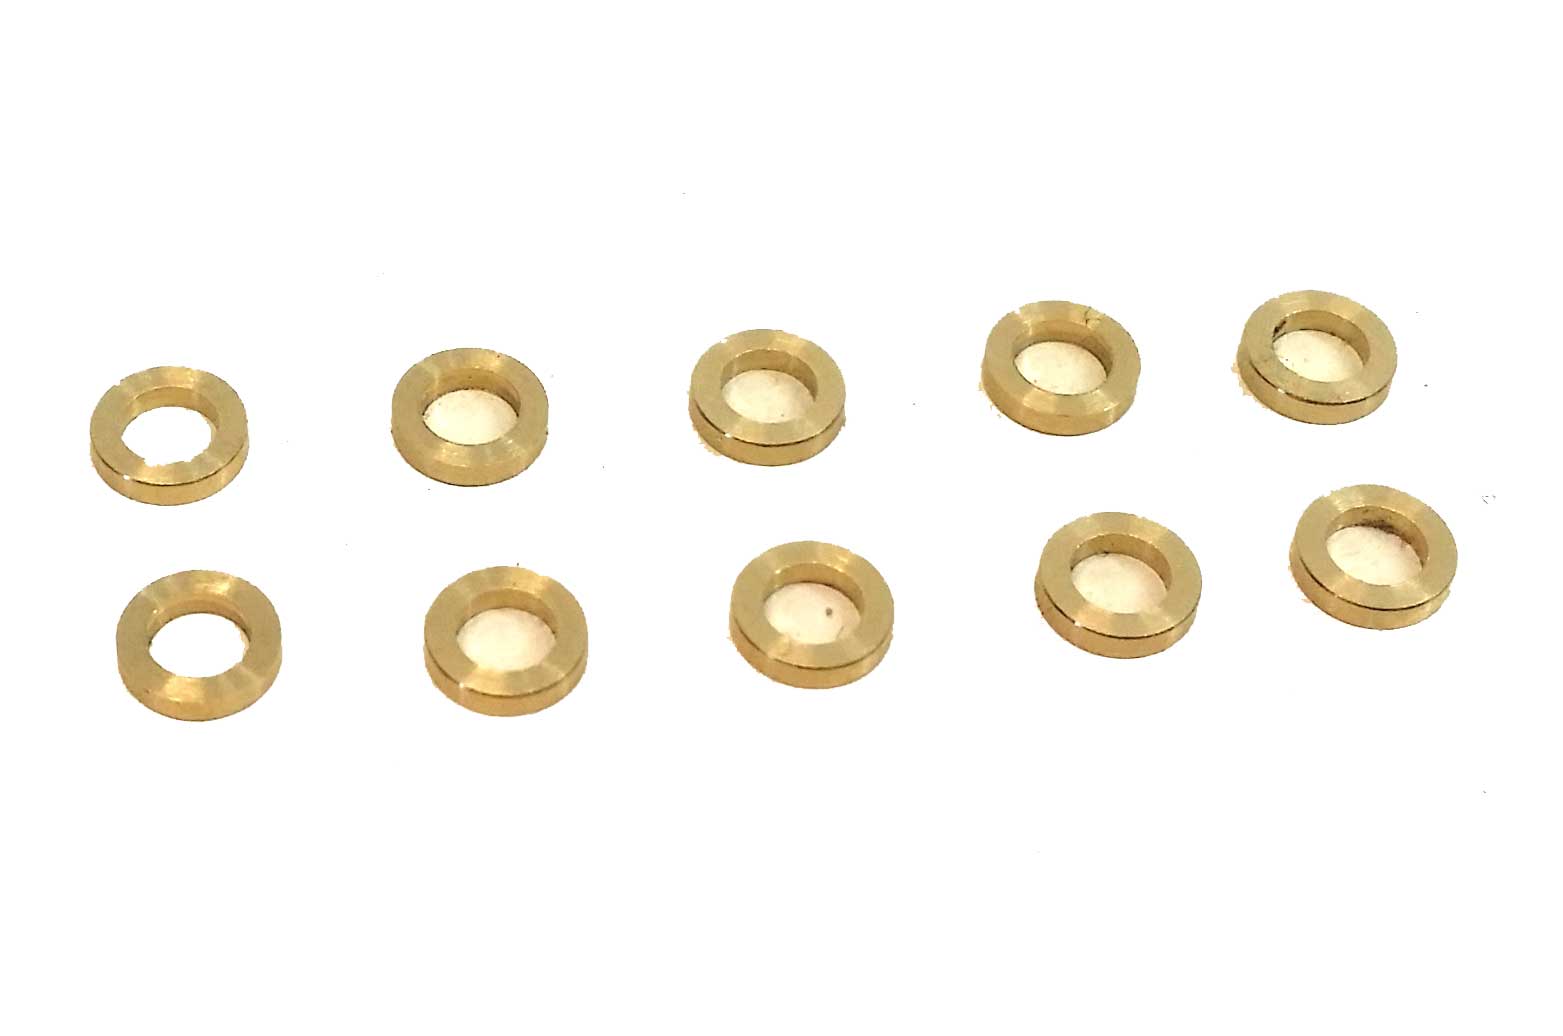 S-011-C  0.5mm x 3mmBRASS AXLE SPACERS (10 pcs)